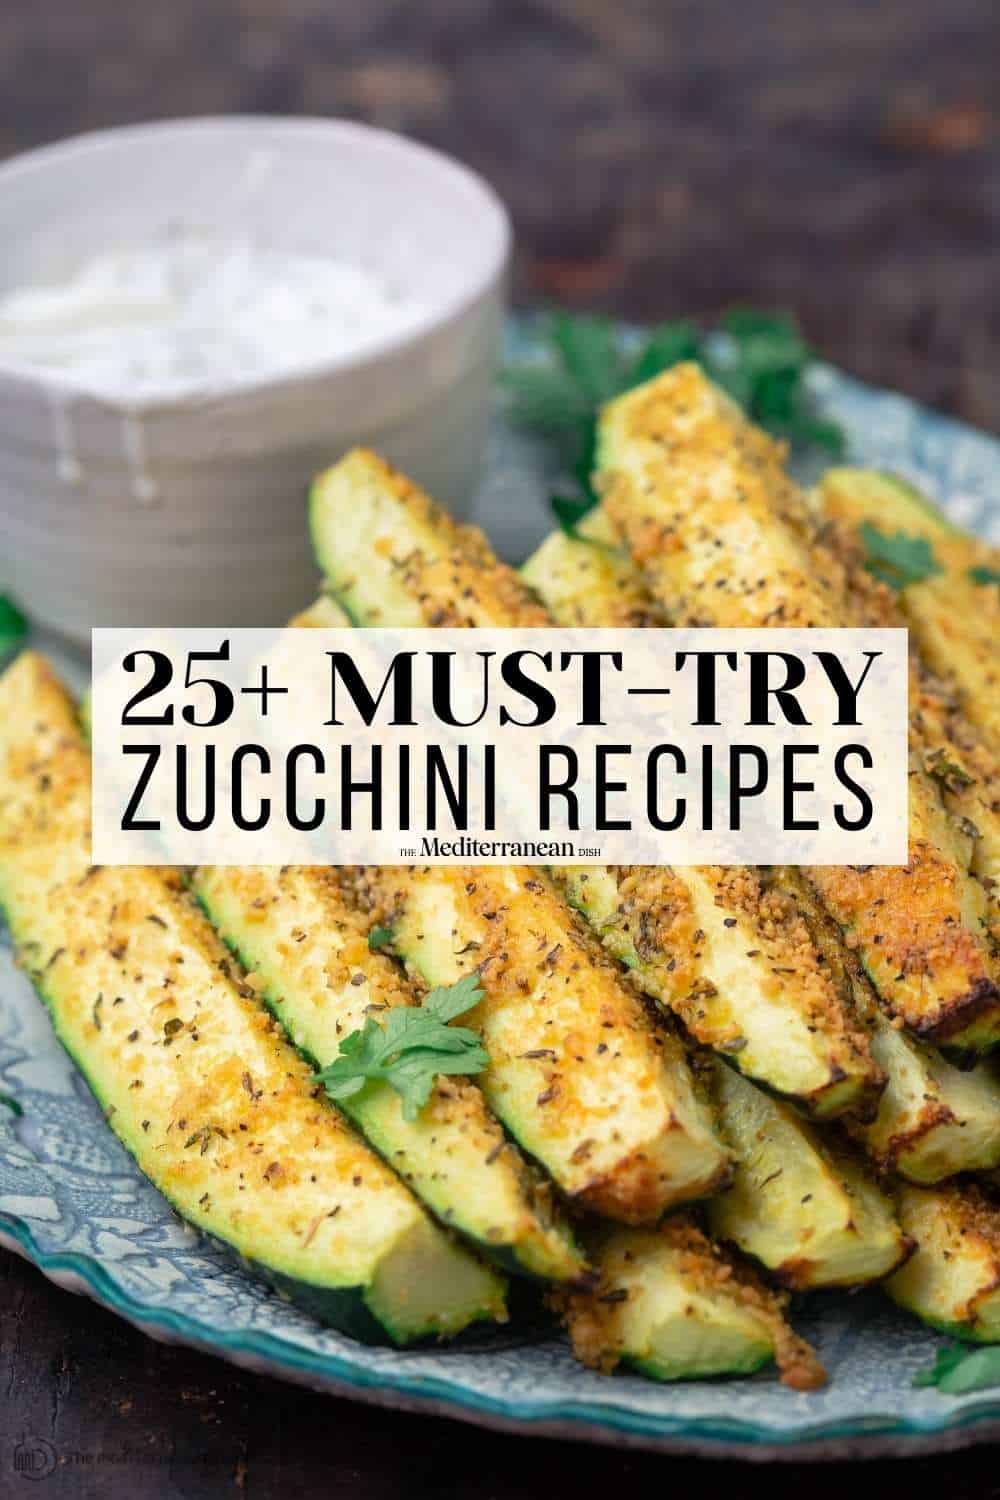 image and pin image 2 for easy zucchini recipes featuring baked zucchini spears with parmesan cheese.